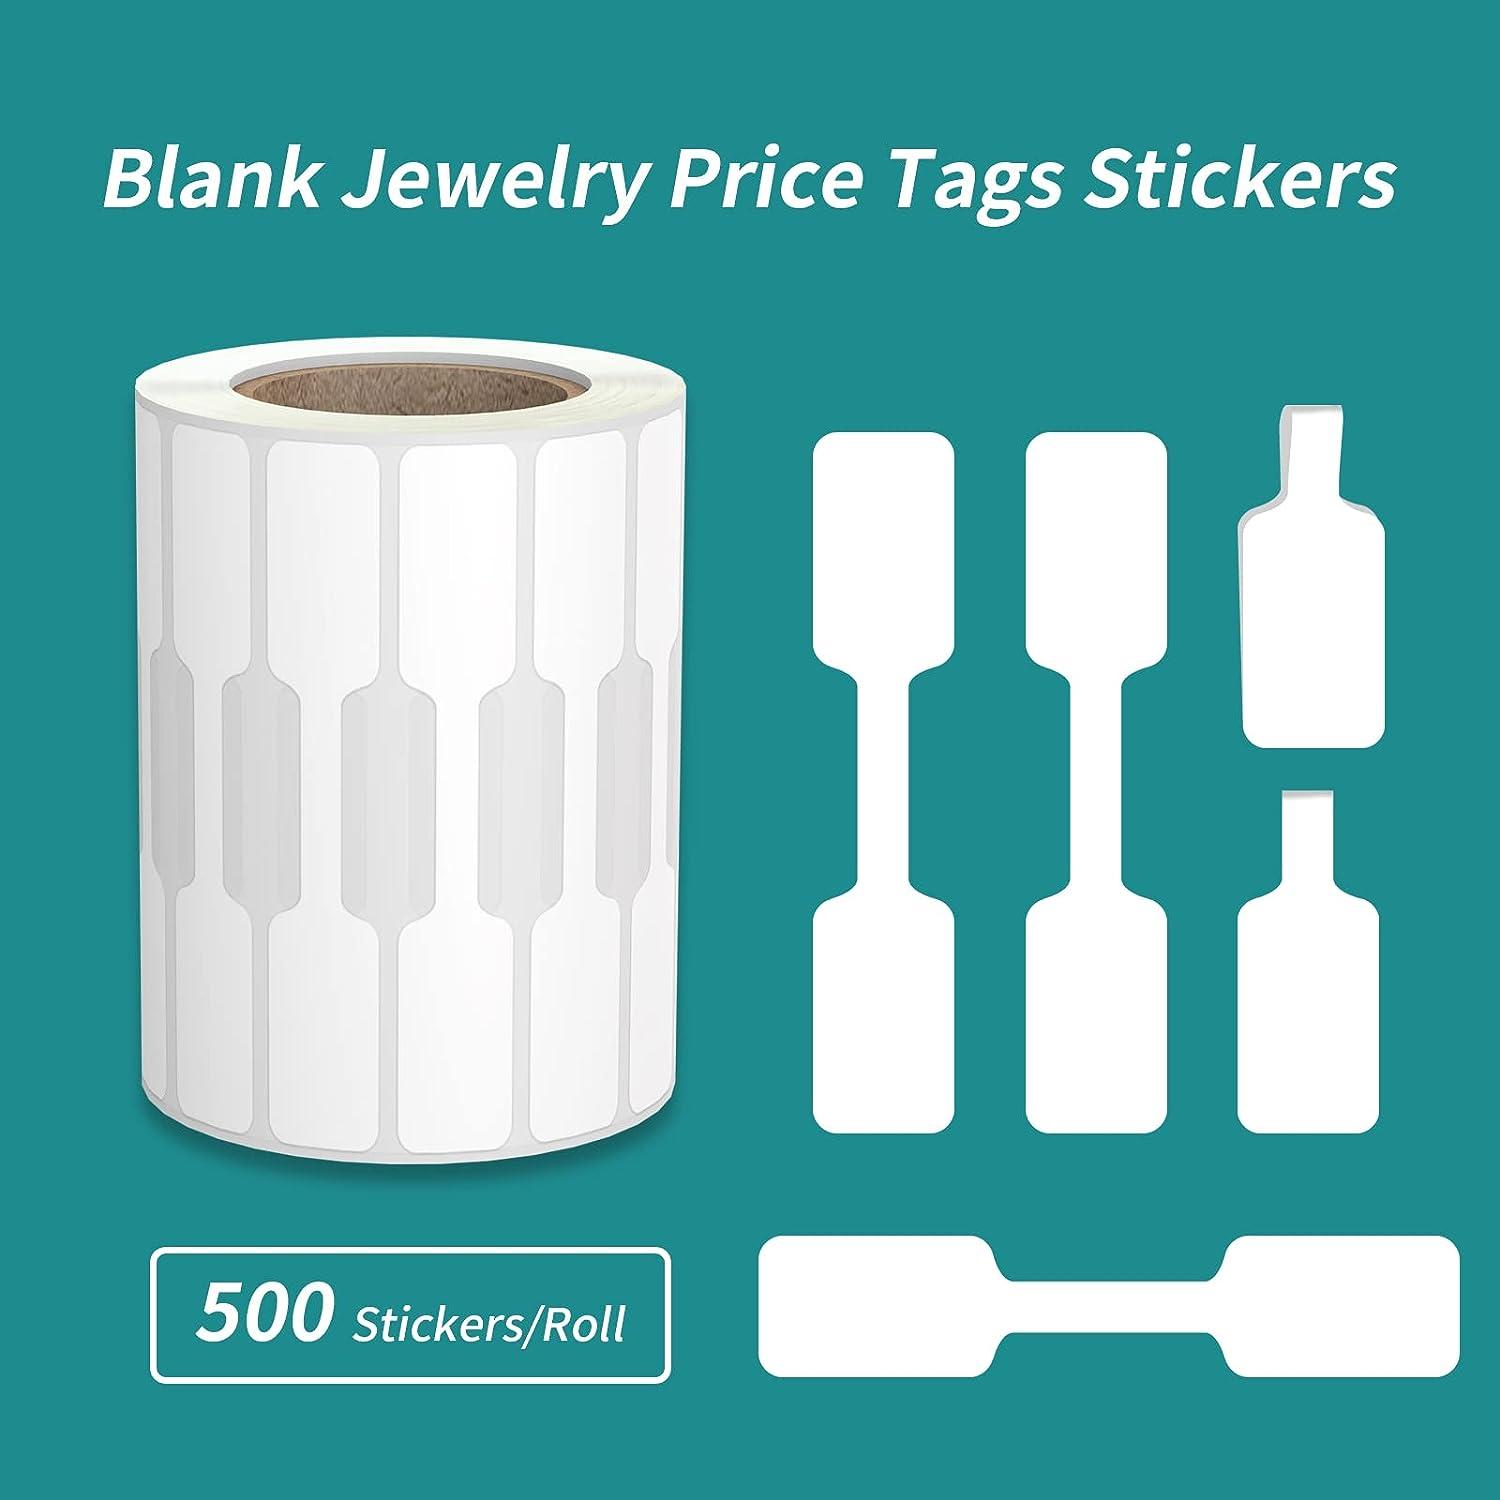  Jewelry Price Tag Stickers / Labels / Tags, Jewelry Barbell  Style Labels For Pricing, Info & Product Identity, 3510 PCS, White Jewelry  Dumbbell Tag Labels For Rings, Necklaces, Bracelets, Earrings +